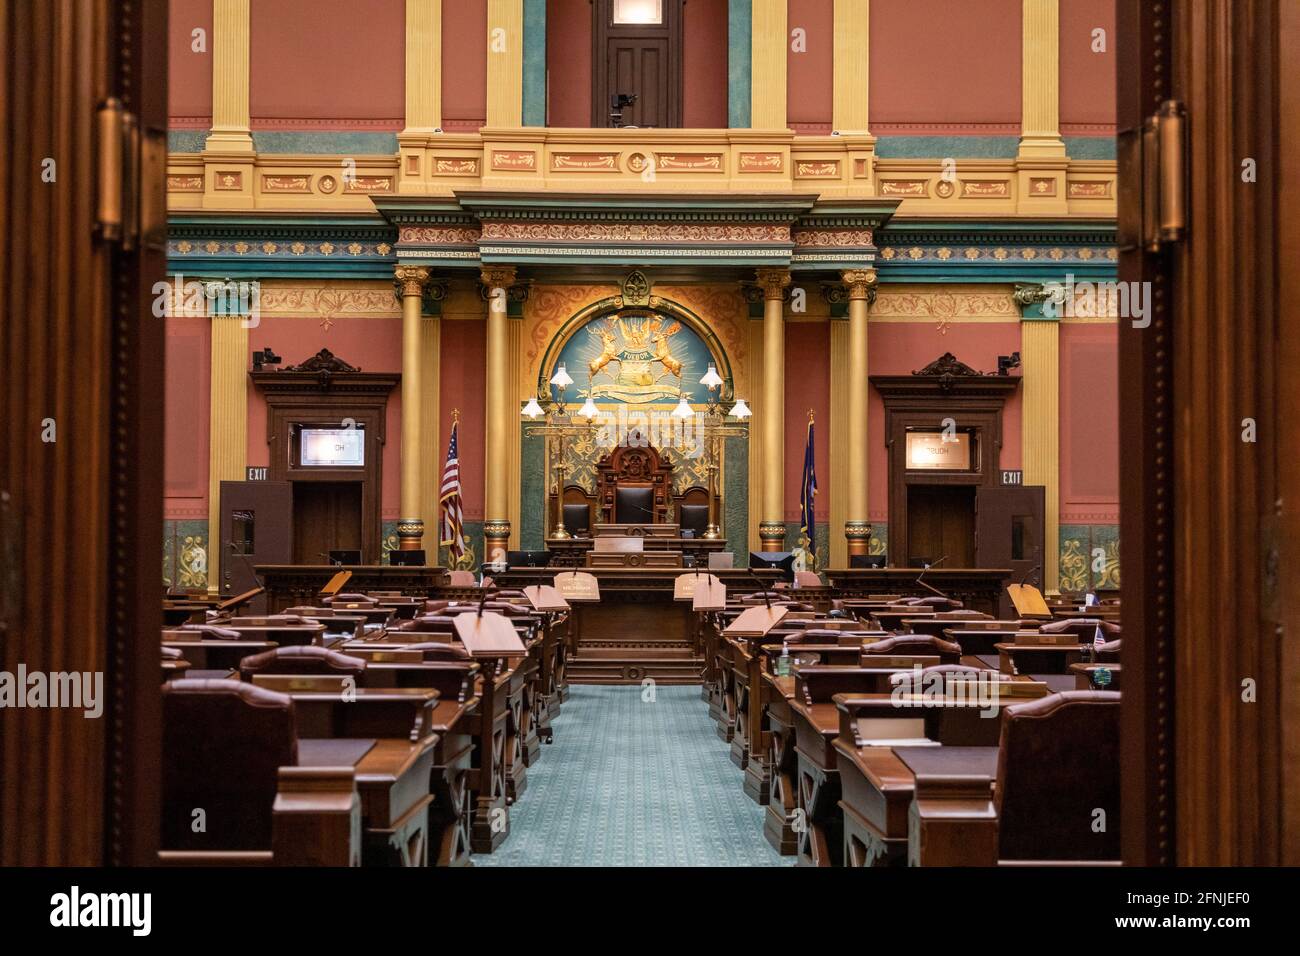 Lansing, Michigan - The House of Representatives chamber in the Michigan State Capitol. Stock Photo